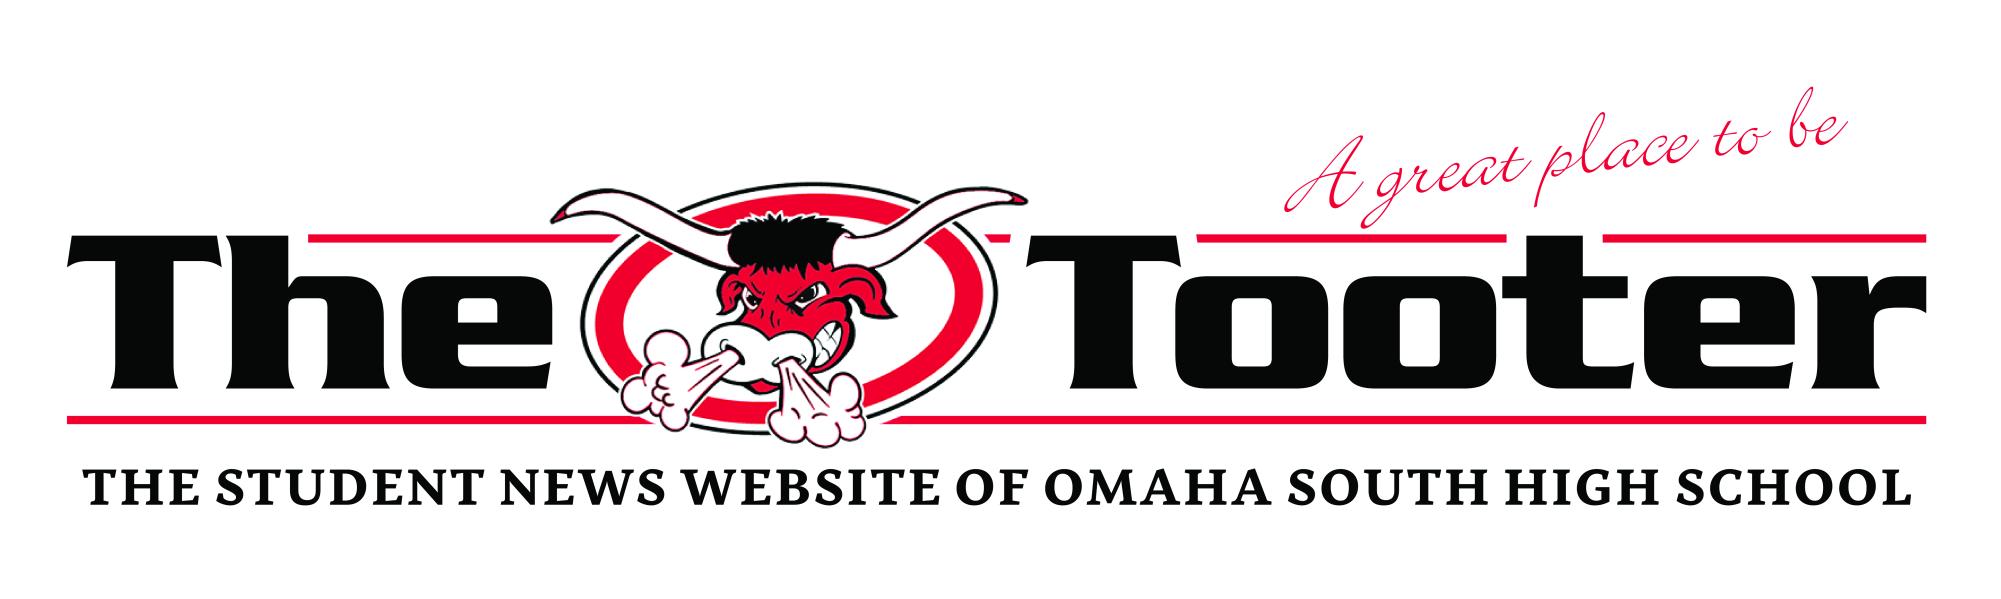 The Student News Site of Omaha South High School